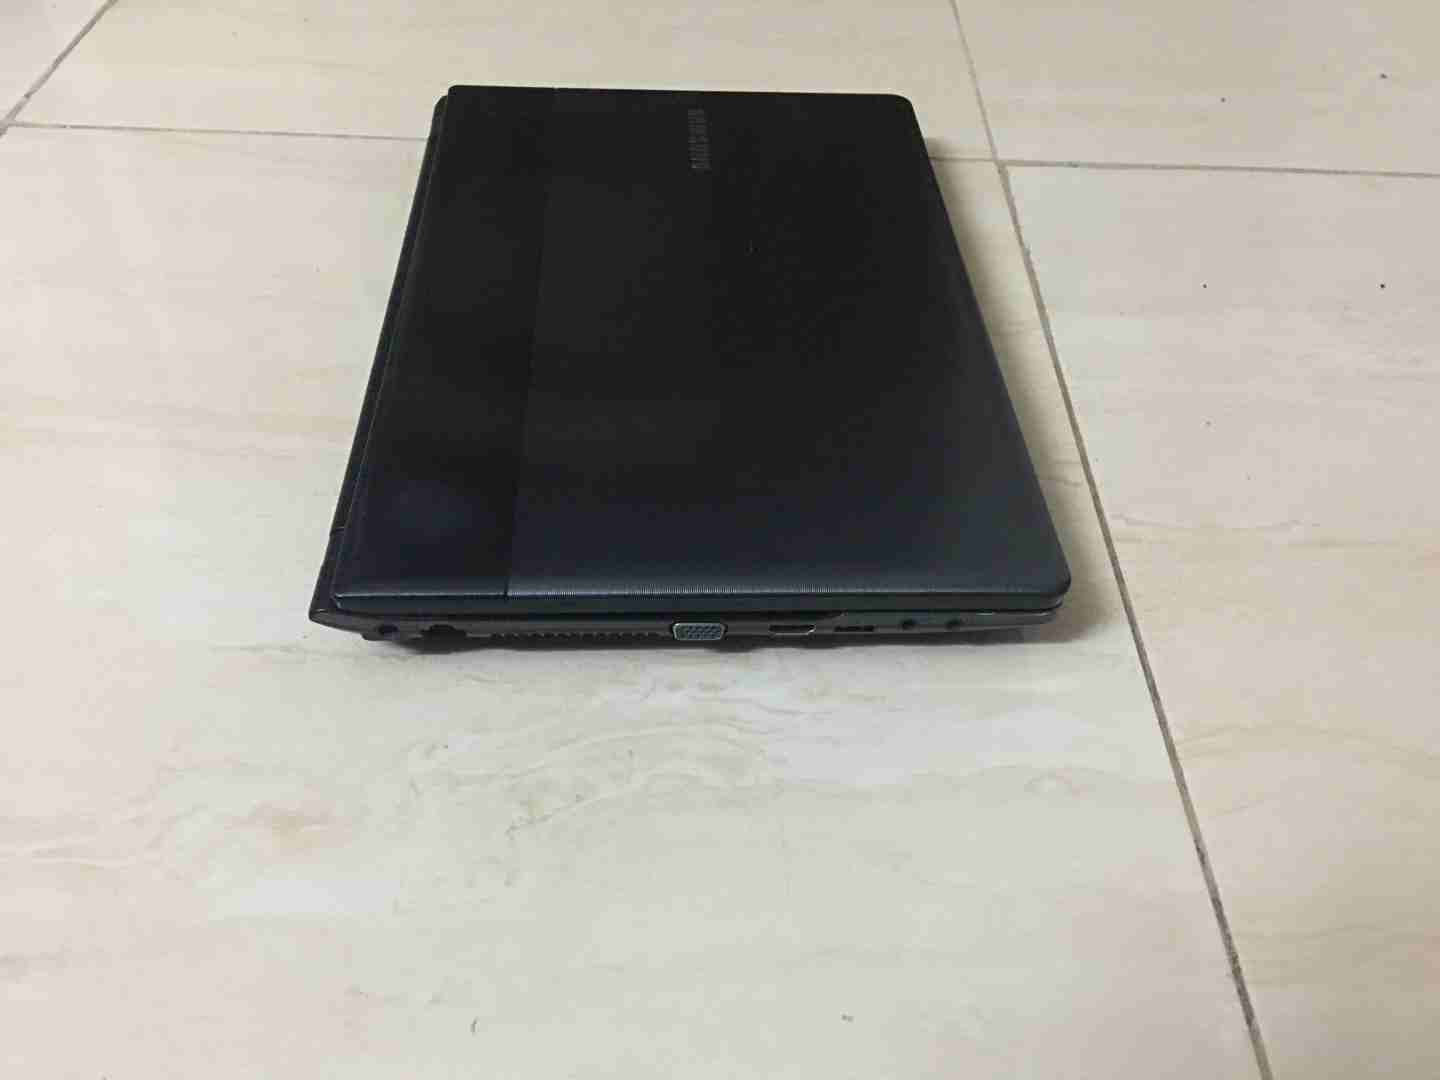 DELL ATG CORE i5 LAPTOP RARLEY USED IN GOOD WORKING CONDITION-  CORE I5 مع كرت شاشه لا...